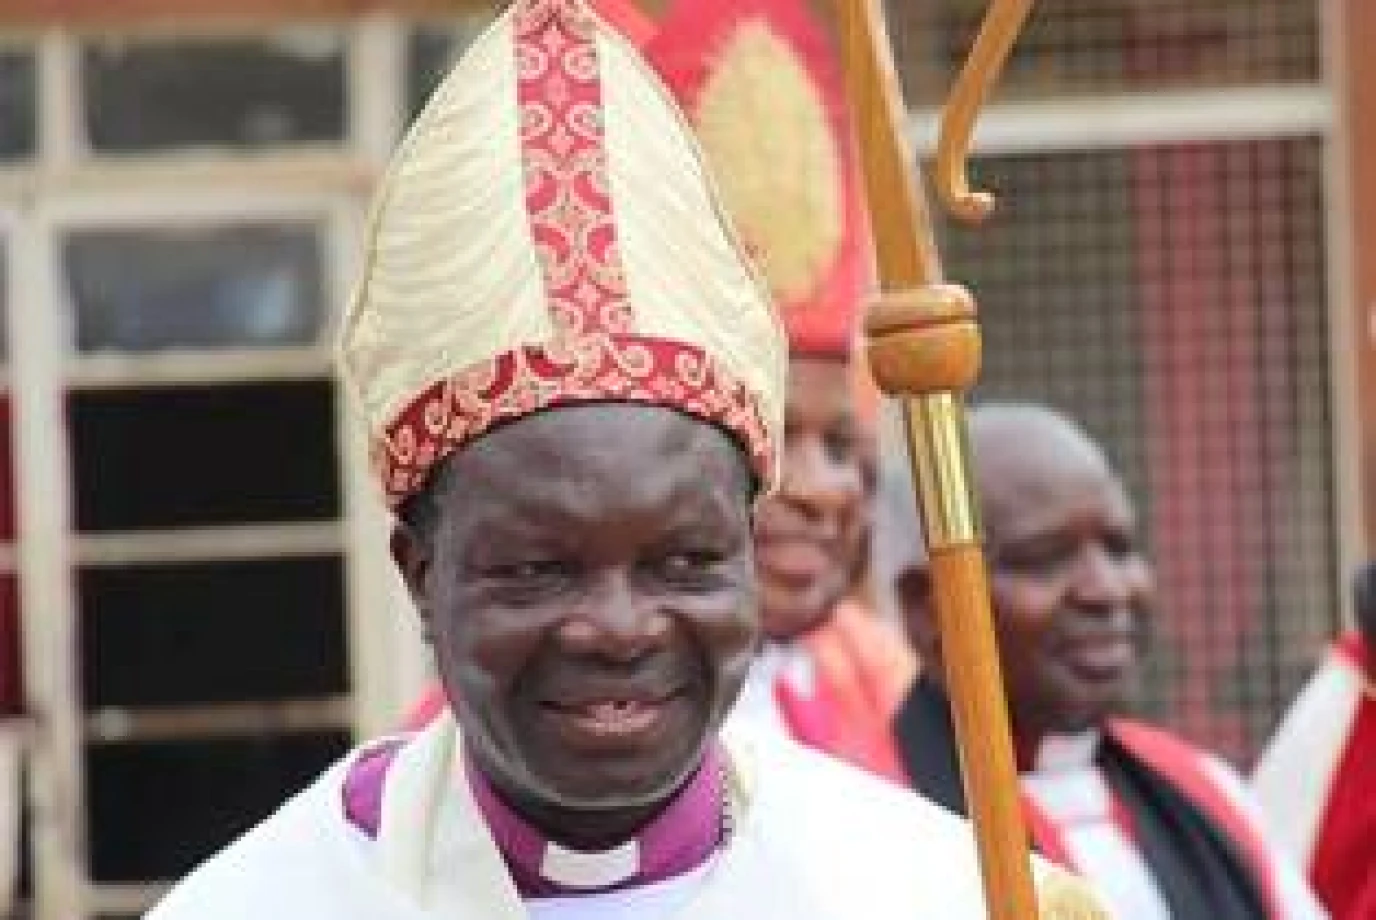 Archbishop Justin sends warm greetings to the diocese